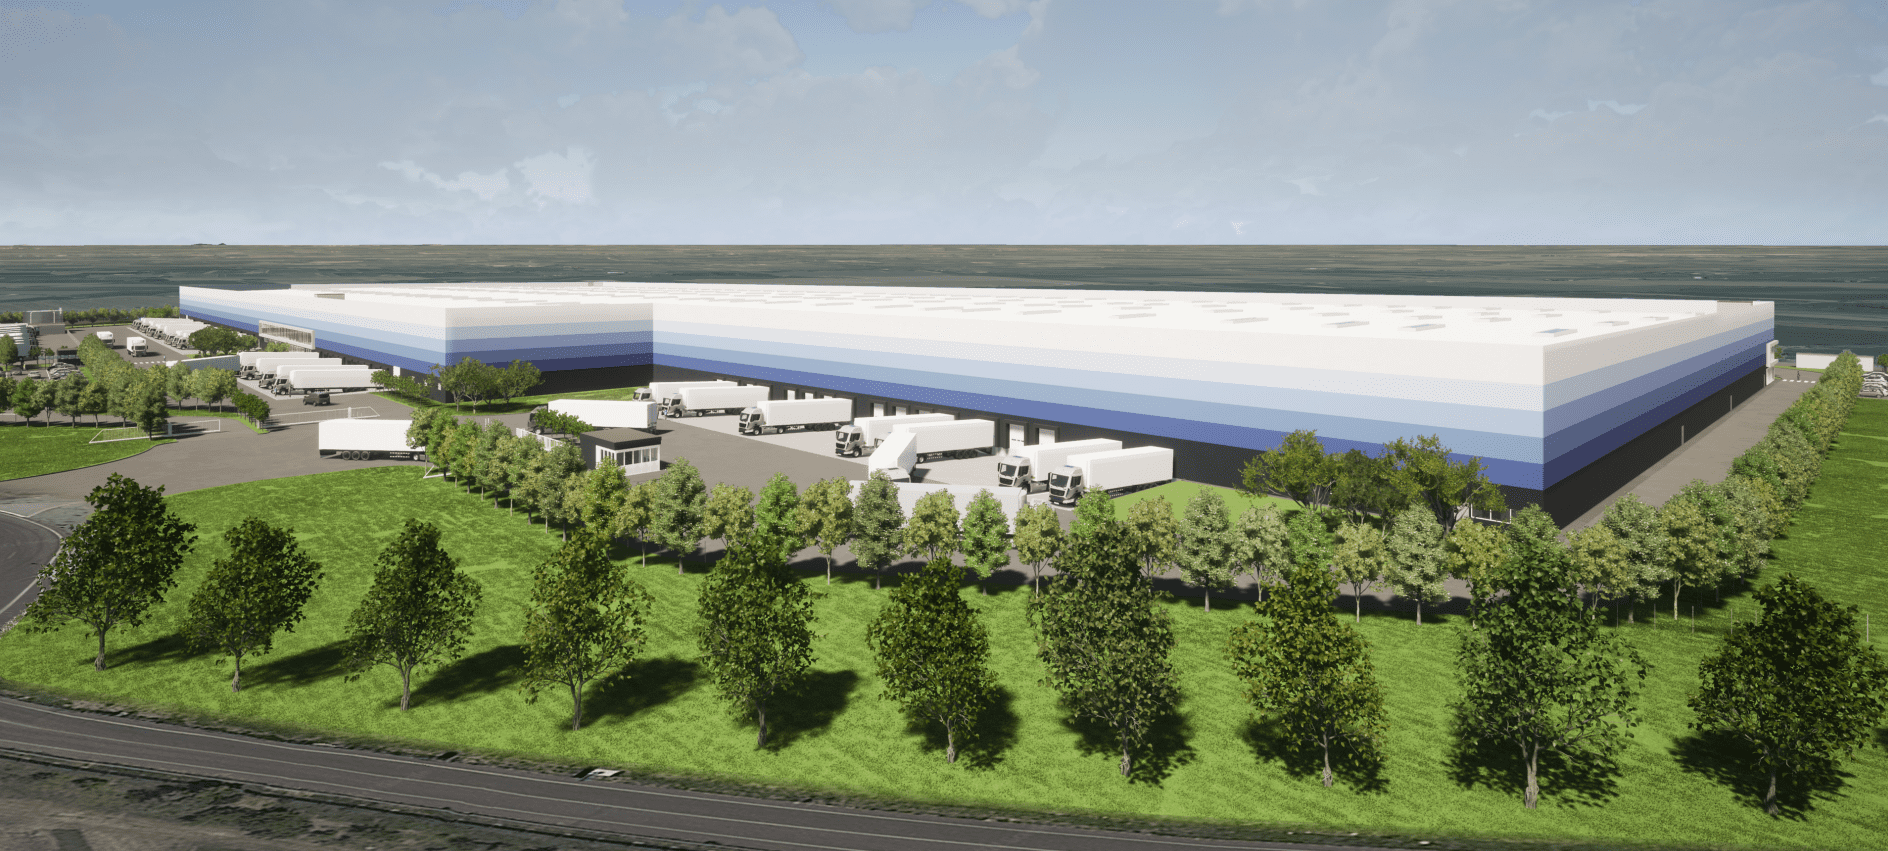 Warehouse CGI in Valasmoggia, surrounded by green spaces and trees.